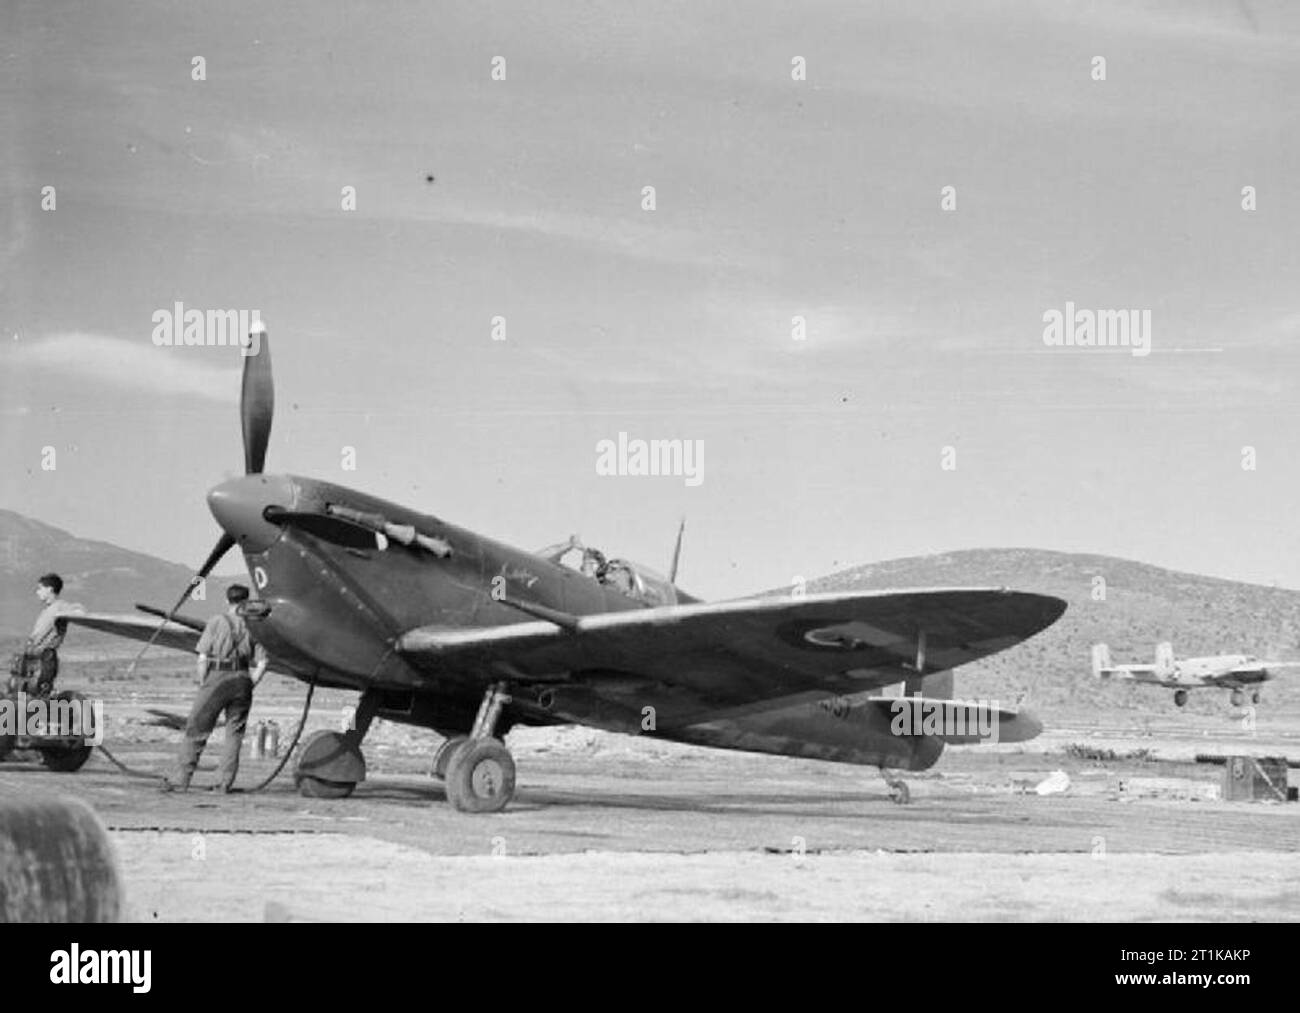 Royal Air Force Operations in the Middle East and North Africa, 1939-1943. Supermarine Spitfire Mark VC, ER557 'EF-D' 'Mustapha', of No. 232 Squadron RAF awaits the signal to start up in its dispersal at Tingley, Algeria. It formed part of the fighter escort for a force of North American B-25s of the 12th Bombardment Group Detachment USAAF, one of which can be seen taking off at right. Stock Photo